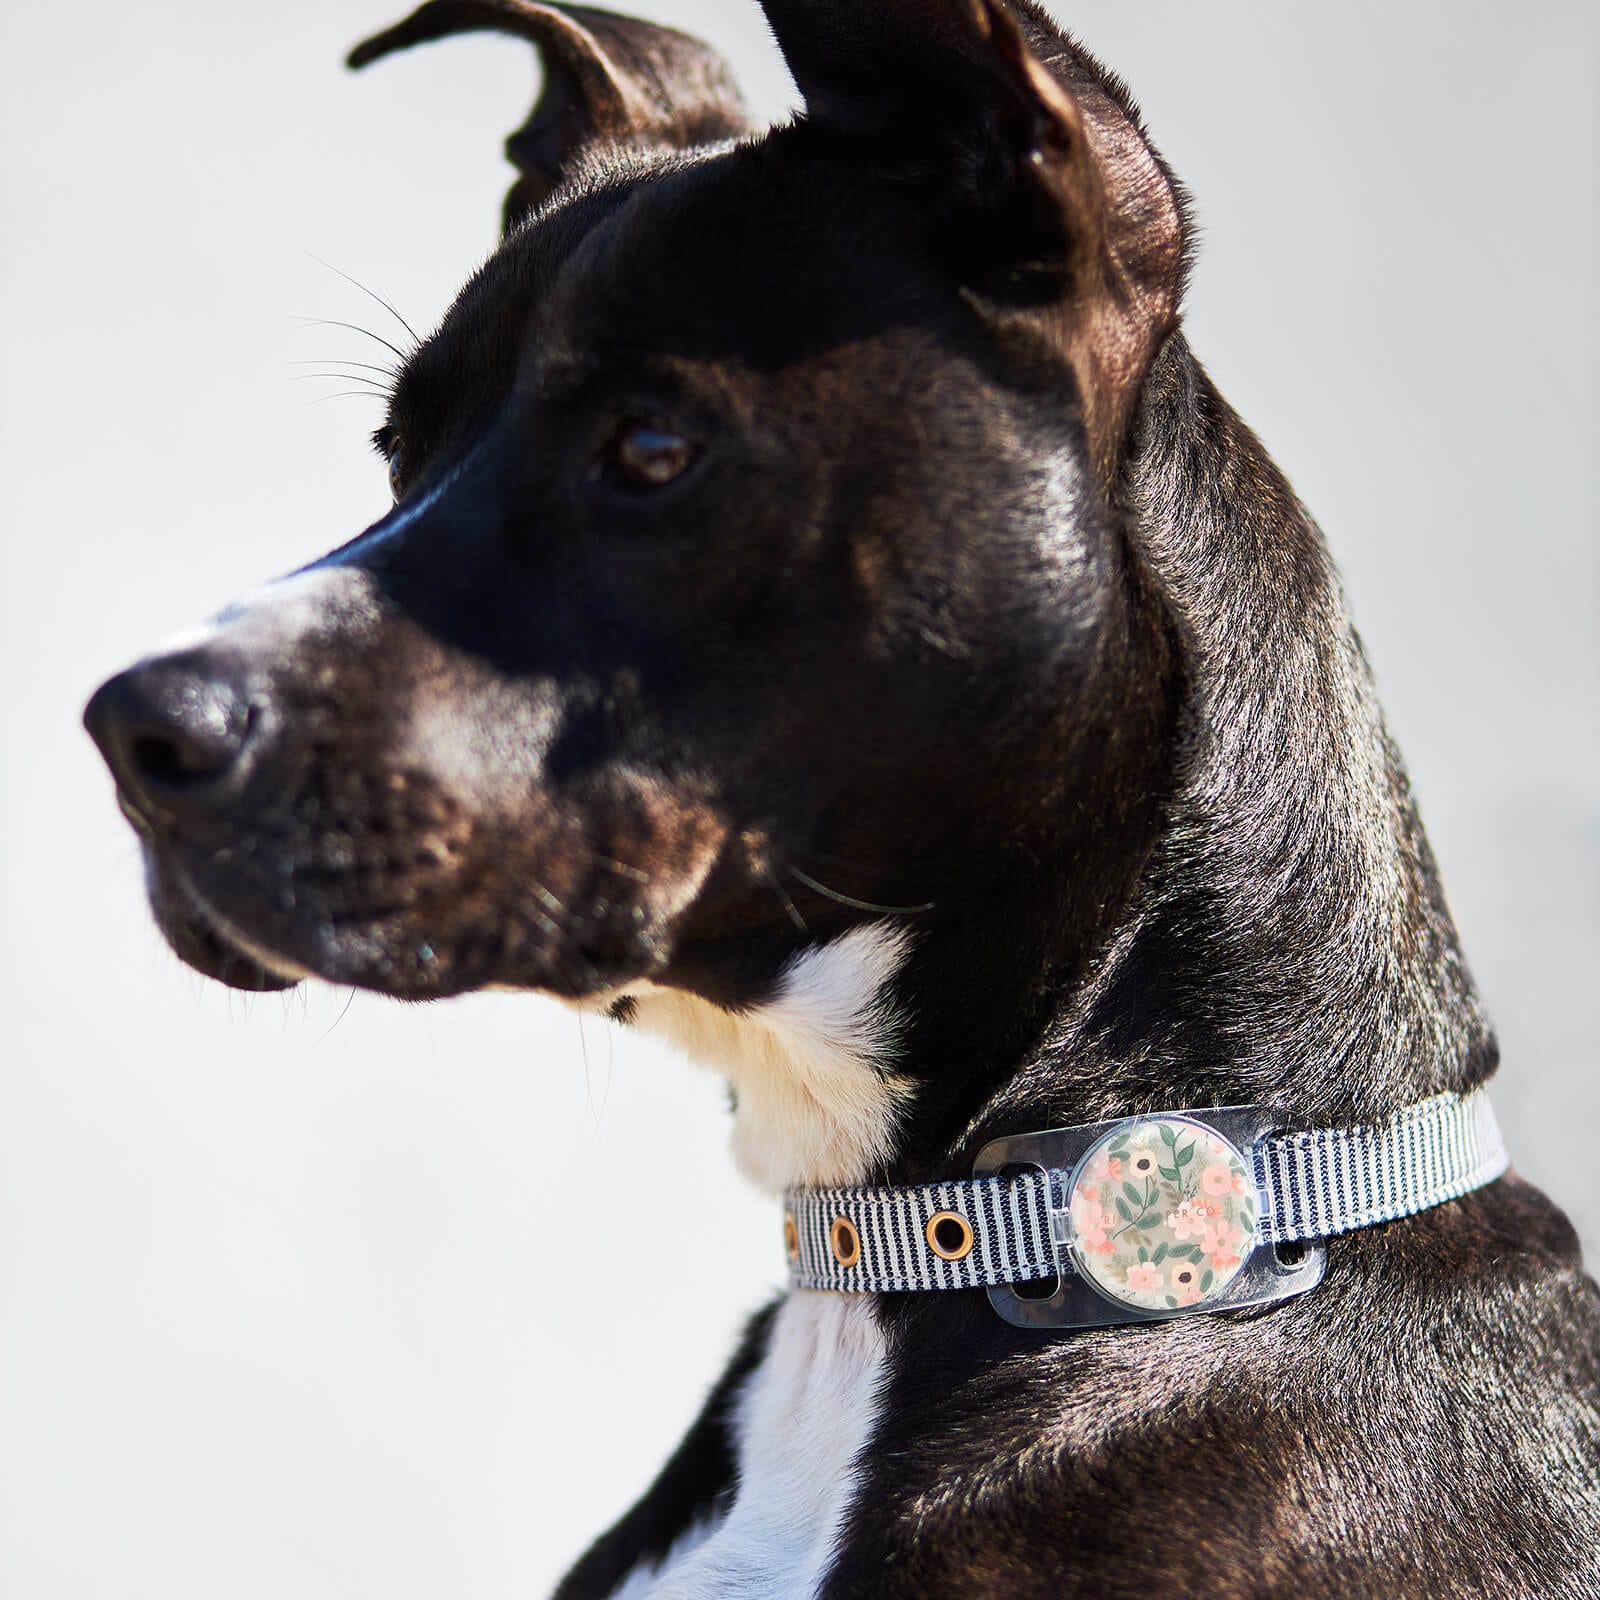 FLORAL AIRTAG CASE SHOWN ON DOG'S COLLAR. Color::Wild Flowers